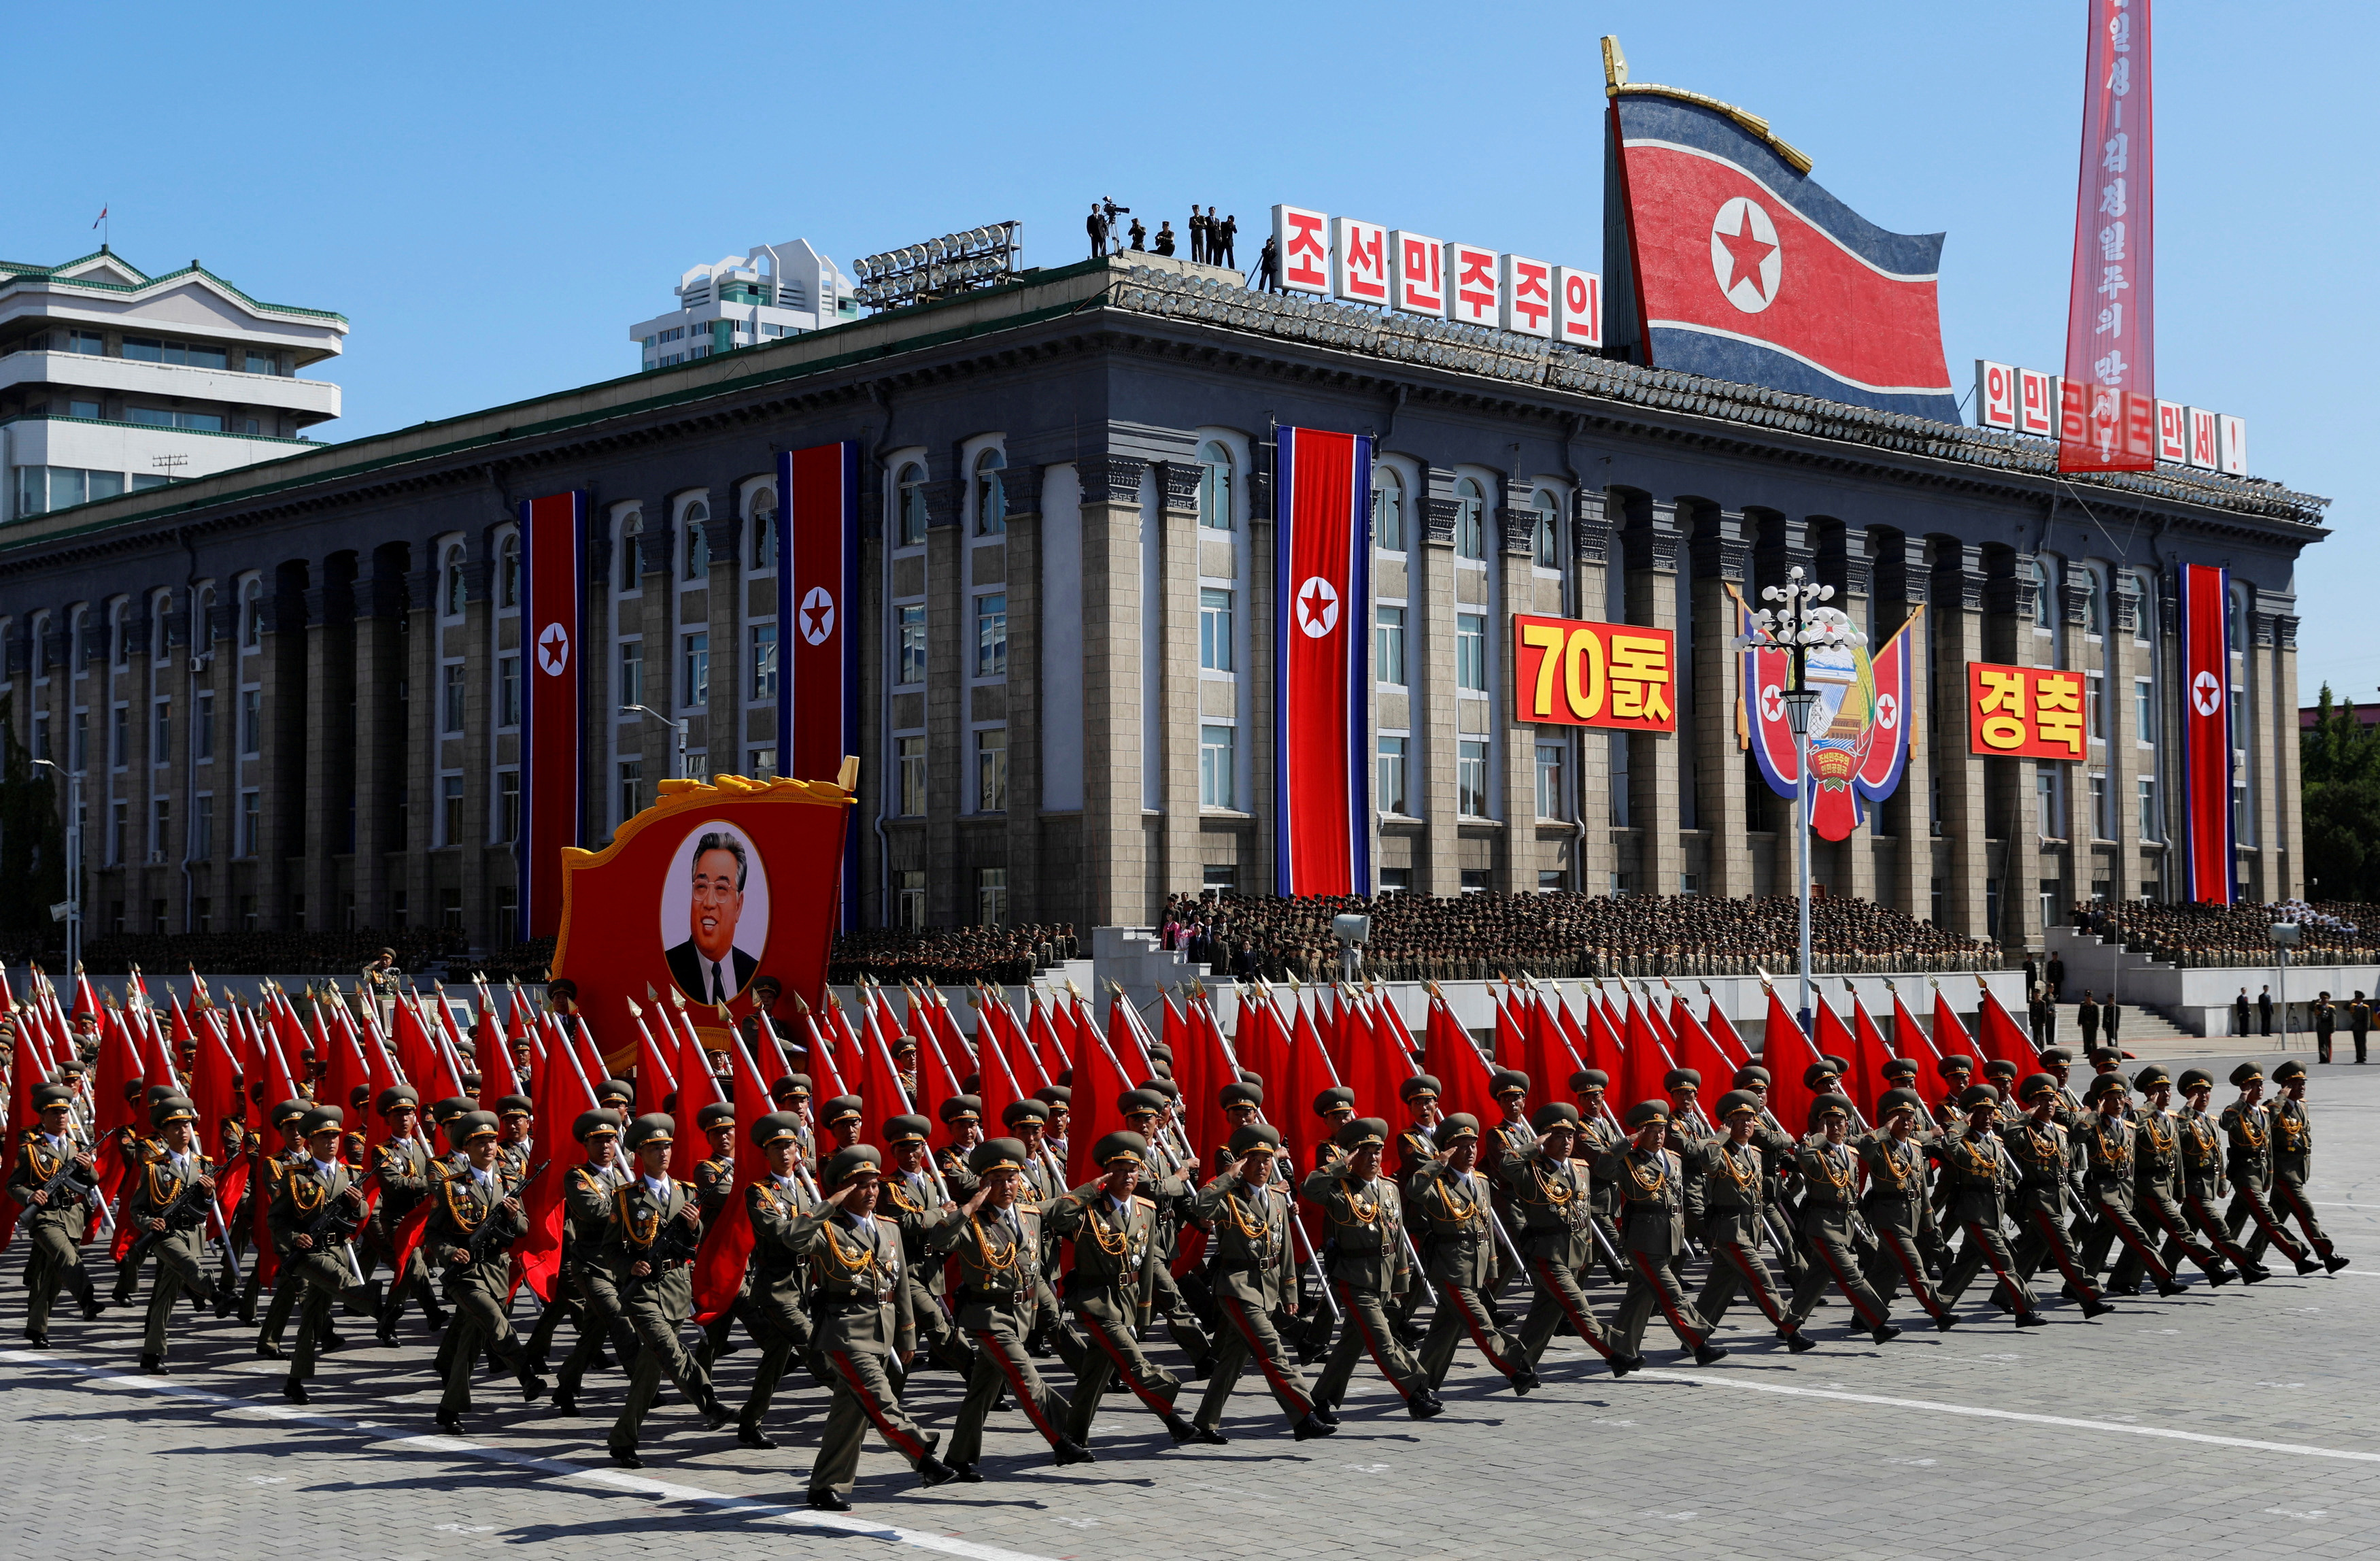 Soldiers march with the portrait of North Korean founder Kim Il Sung during a military parade marking the 70th anniversary of country's foundation in Pyongyang